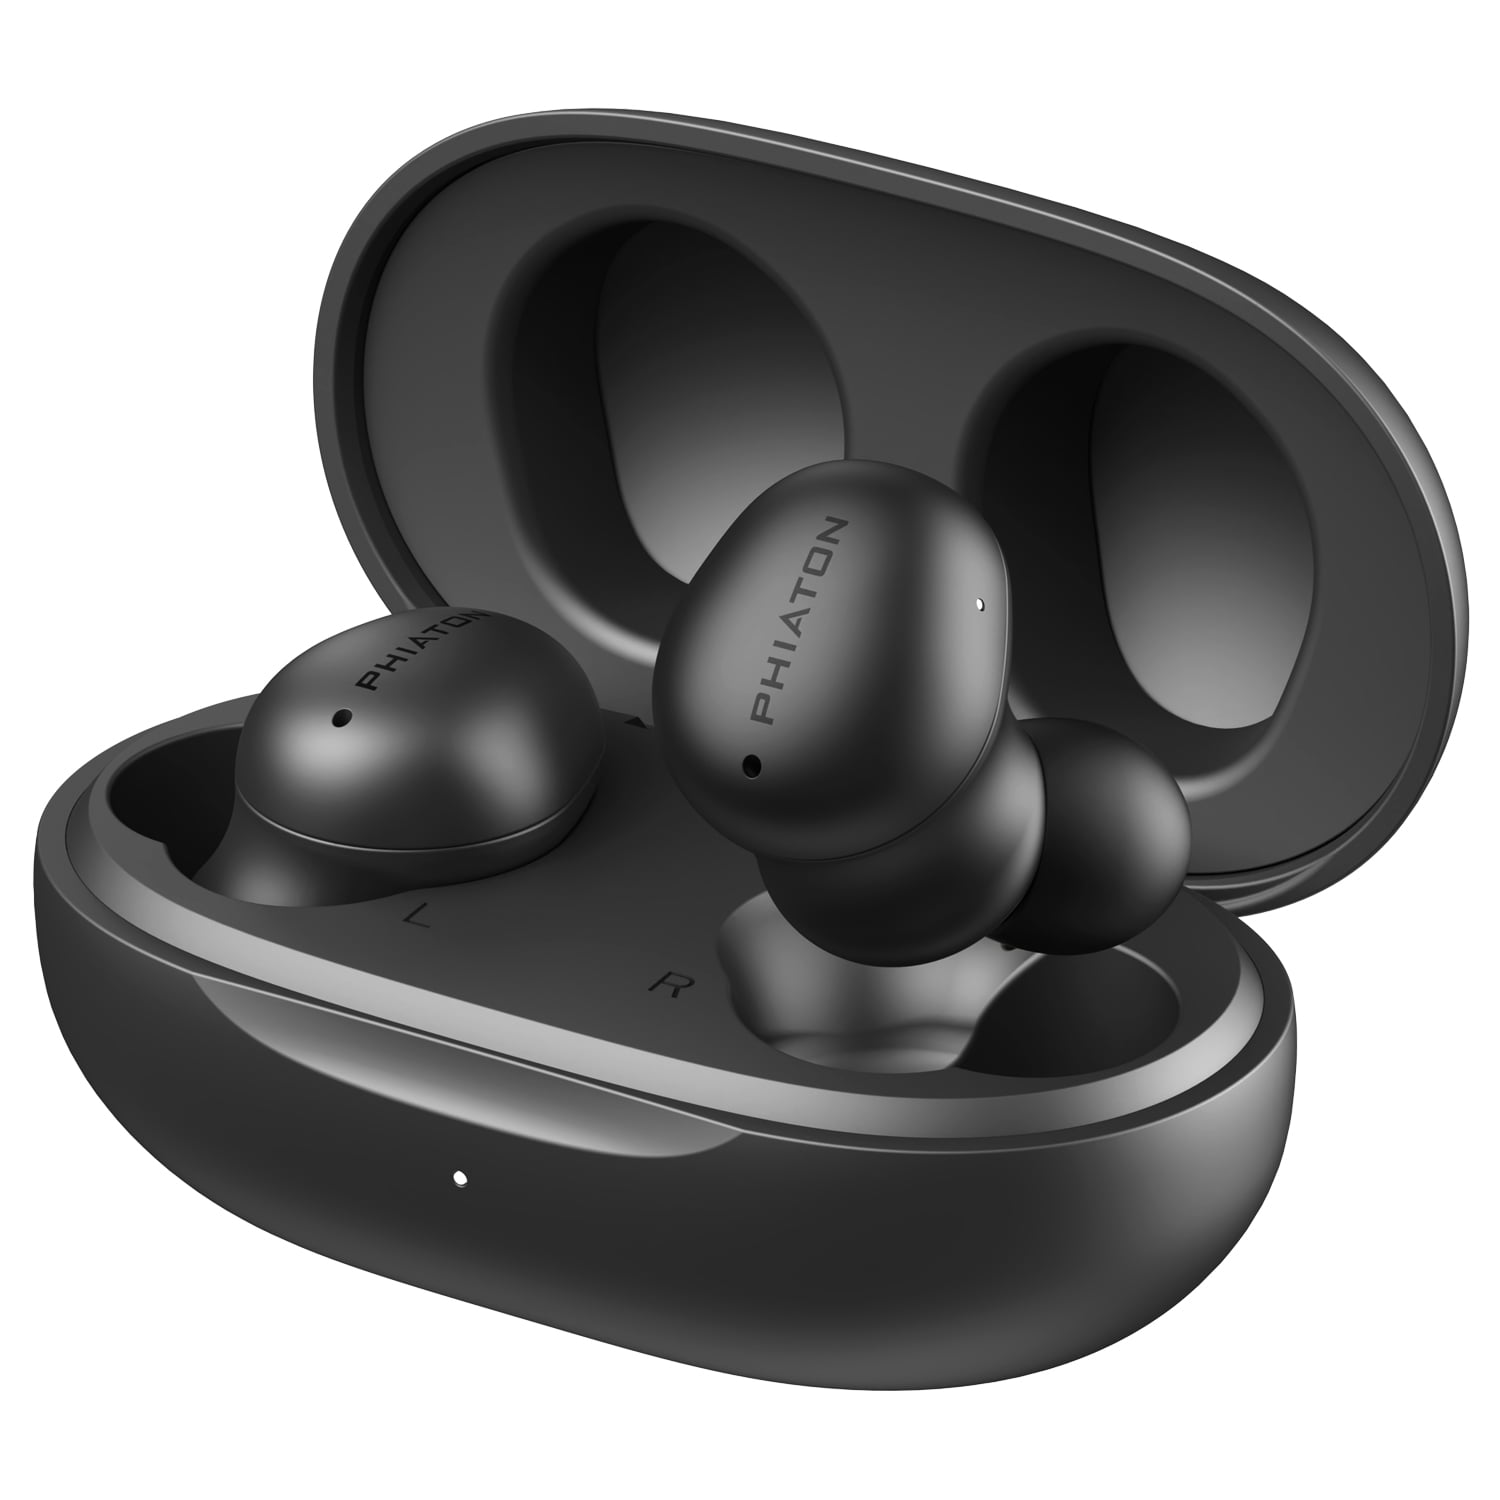 Phiaton Bonobuds Wireless Earbuds with Noise Cancelling